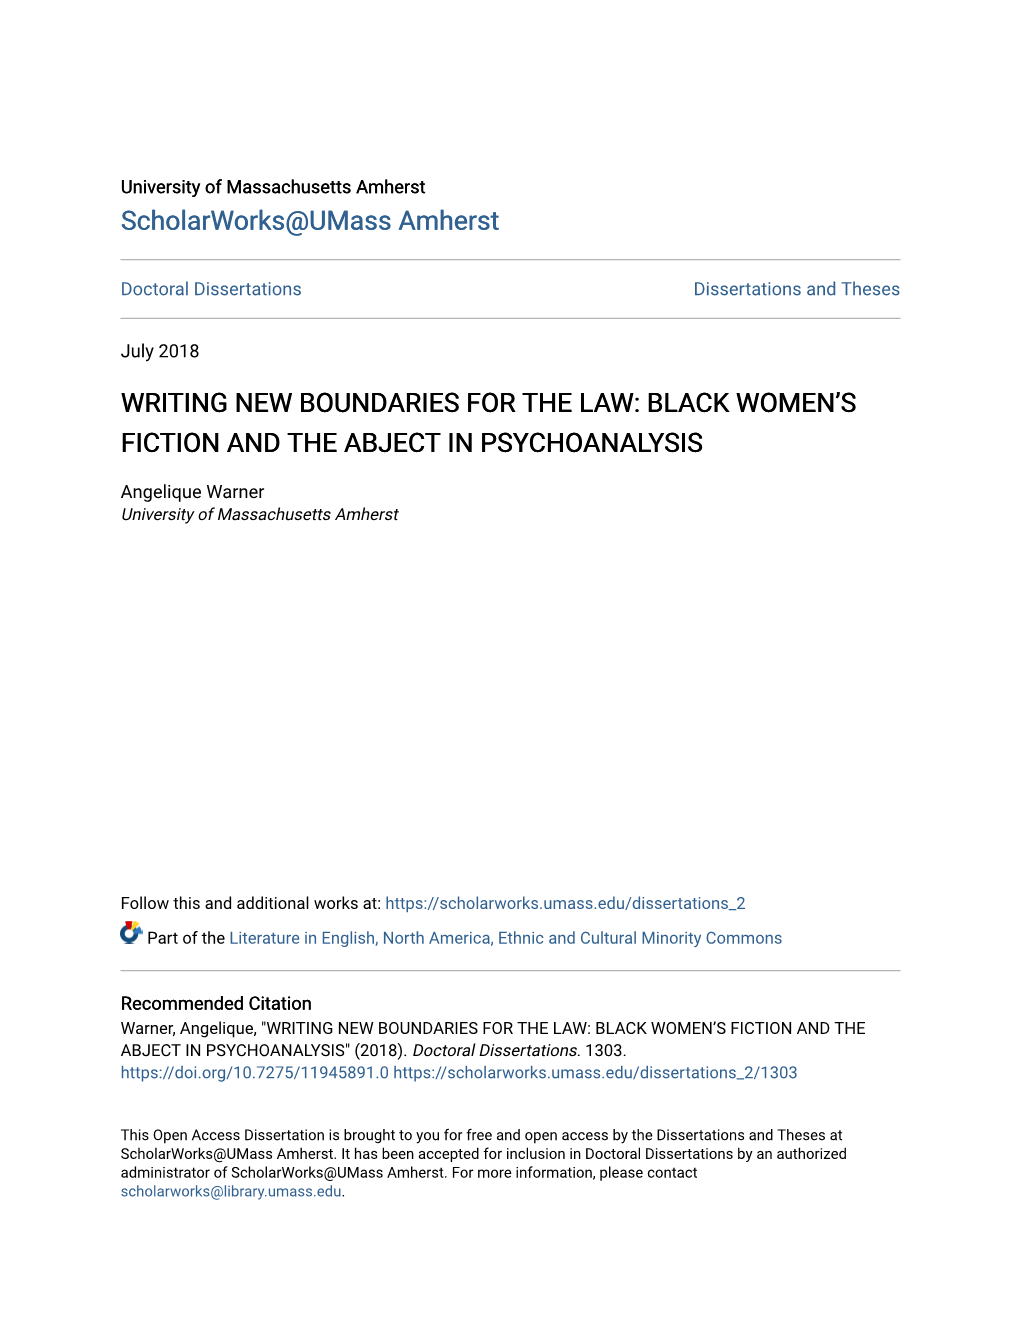 Writing New Boundaries for the Law: Black Women's Fiction and the Abject